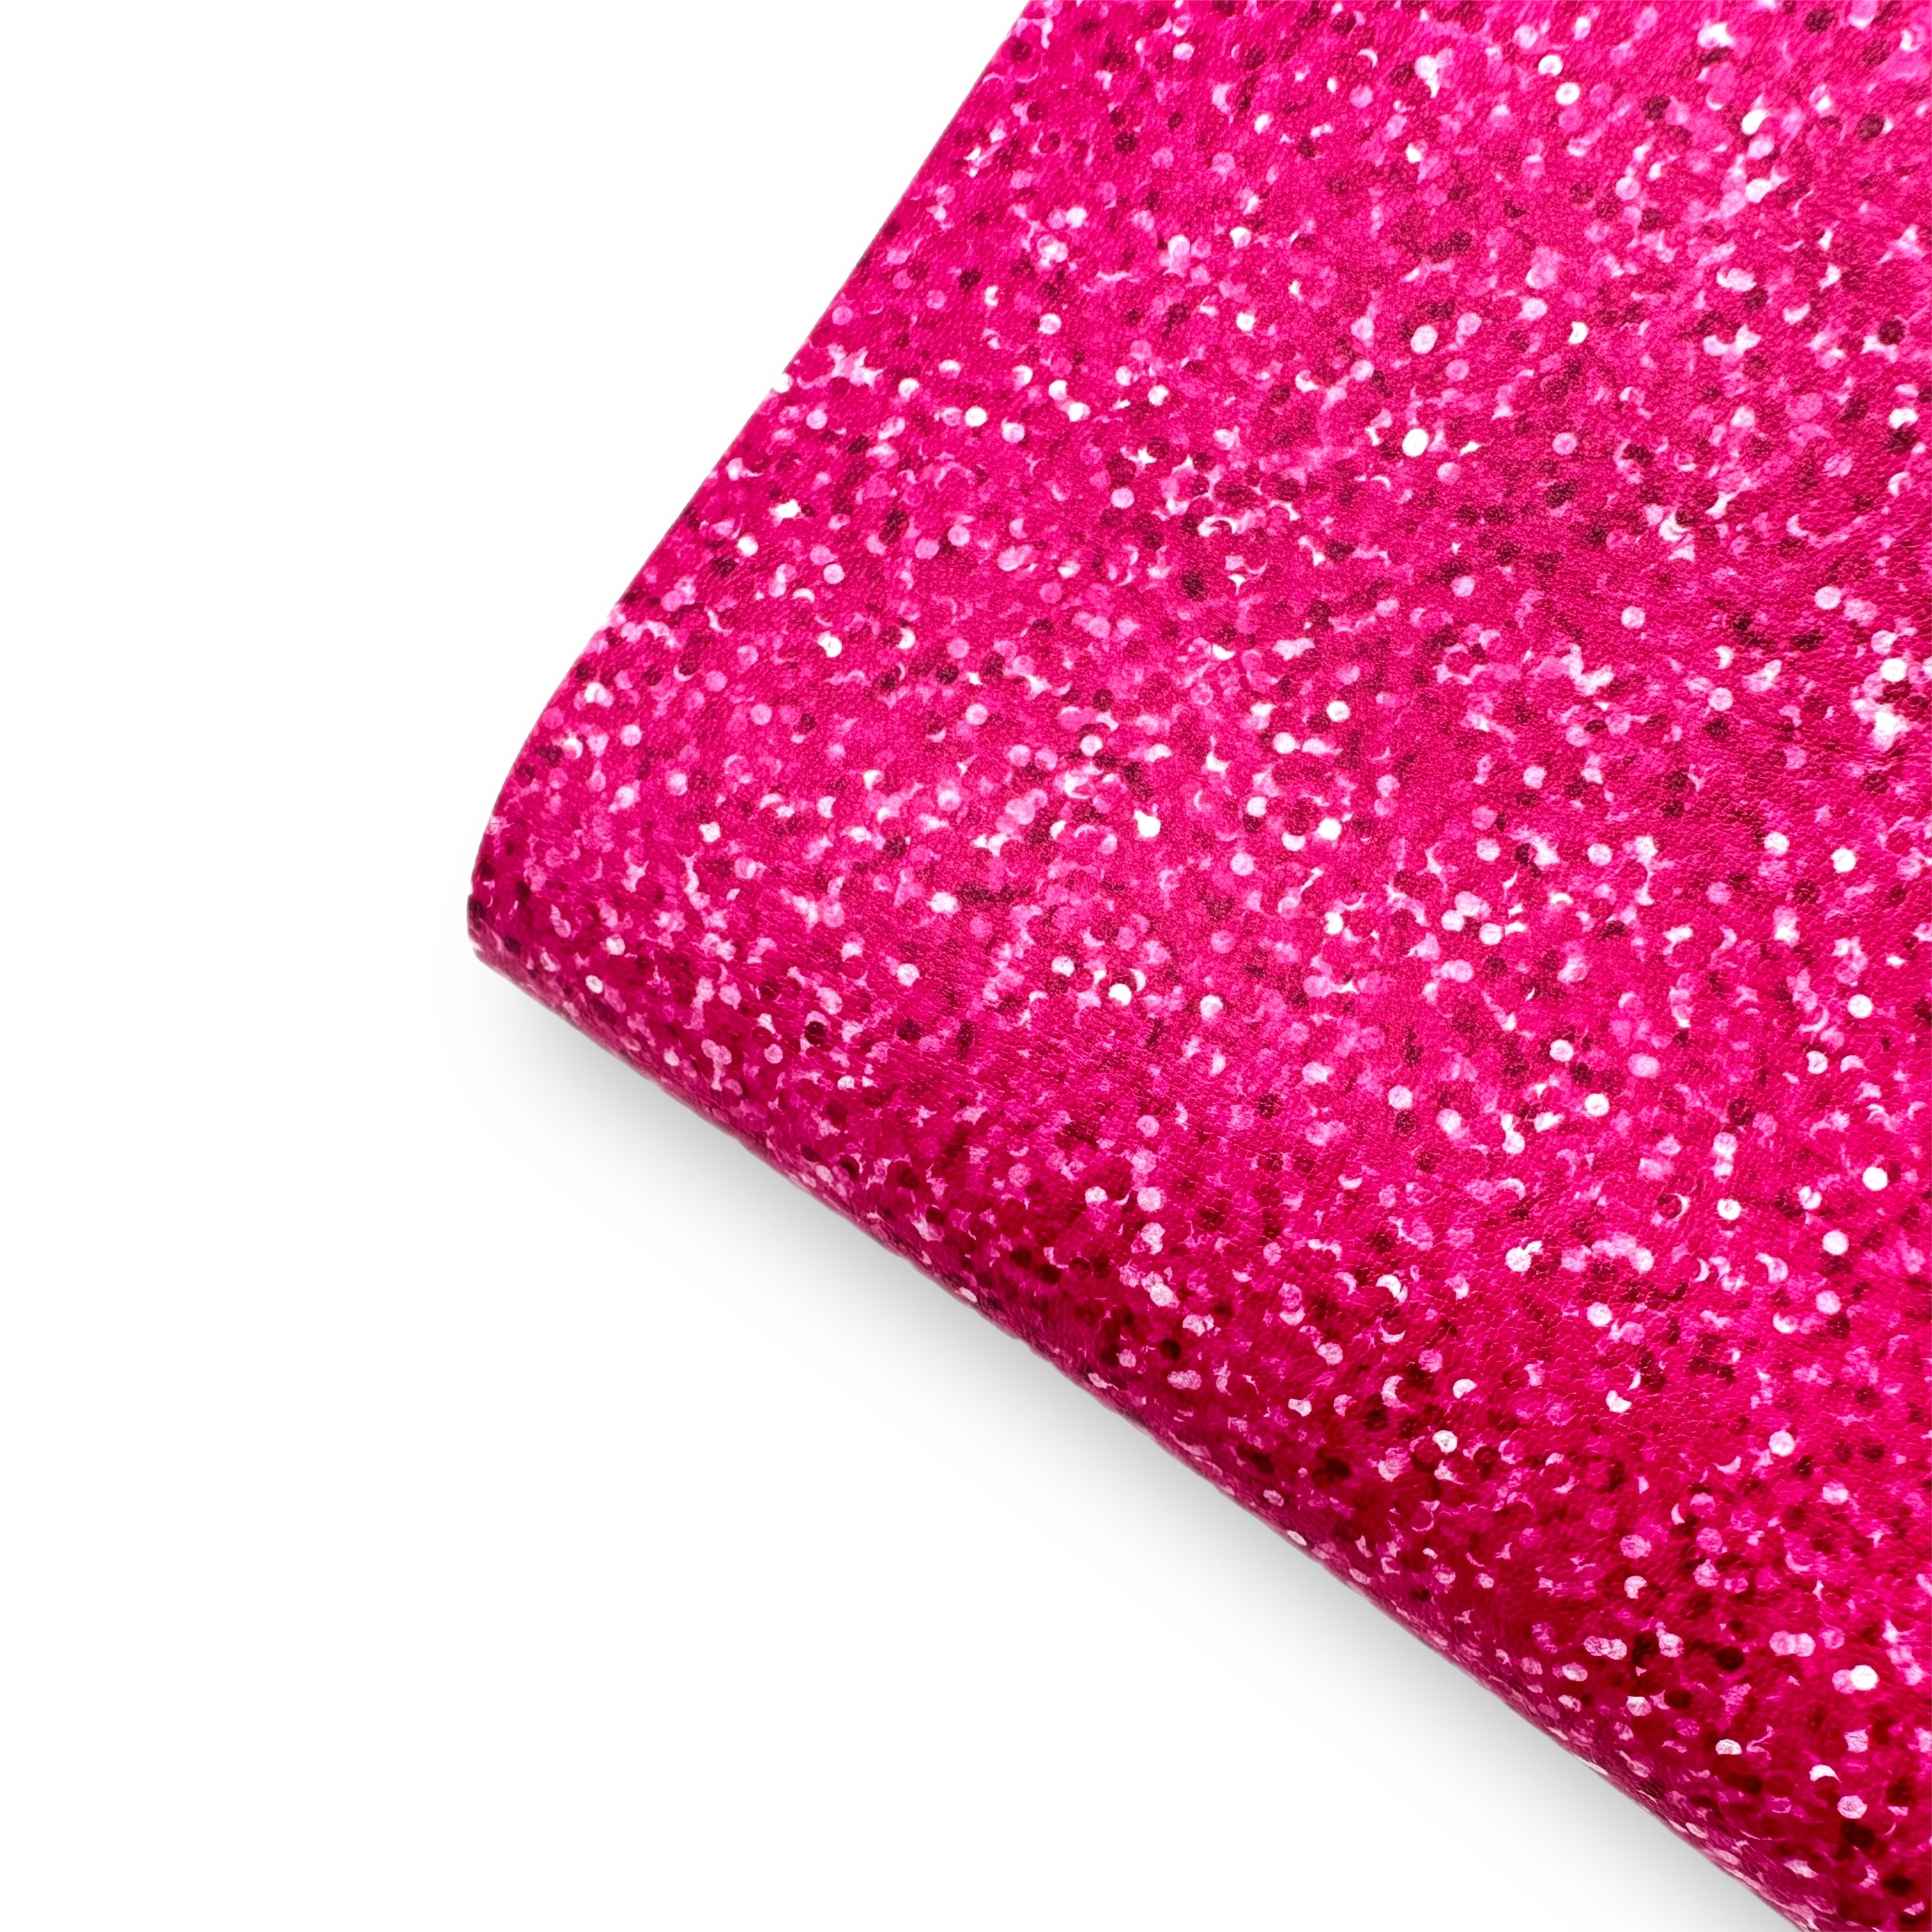 Hot Pink Faux Glitter Effect Premium Faux Leather Fabric Sheets